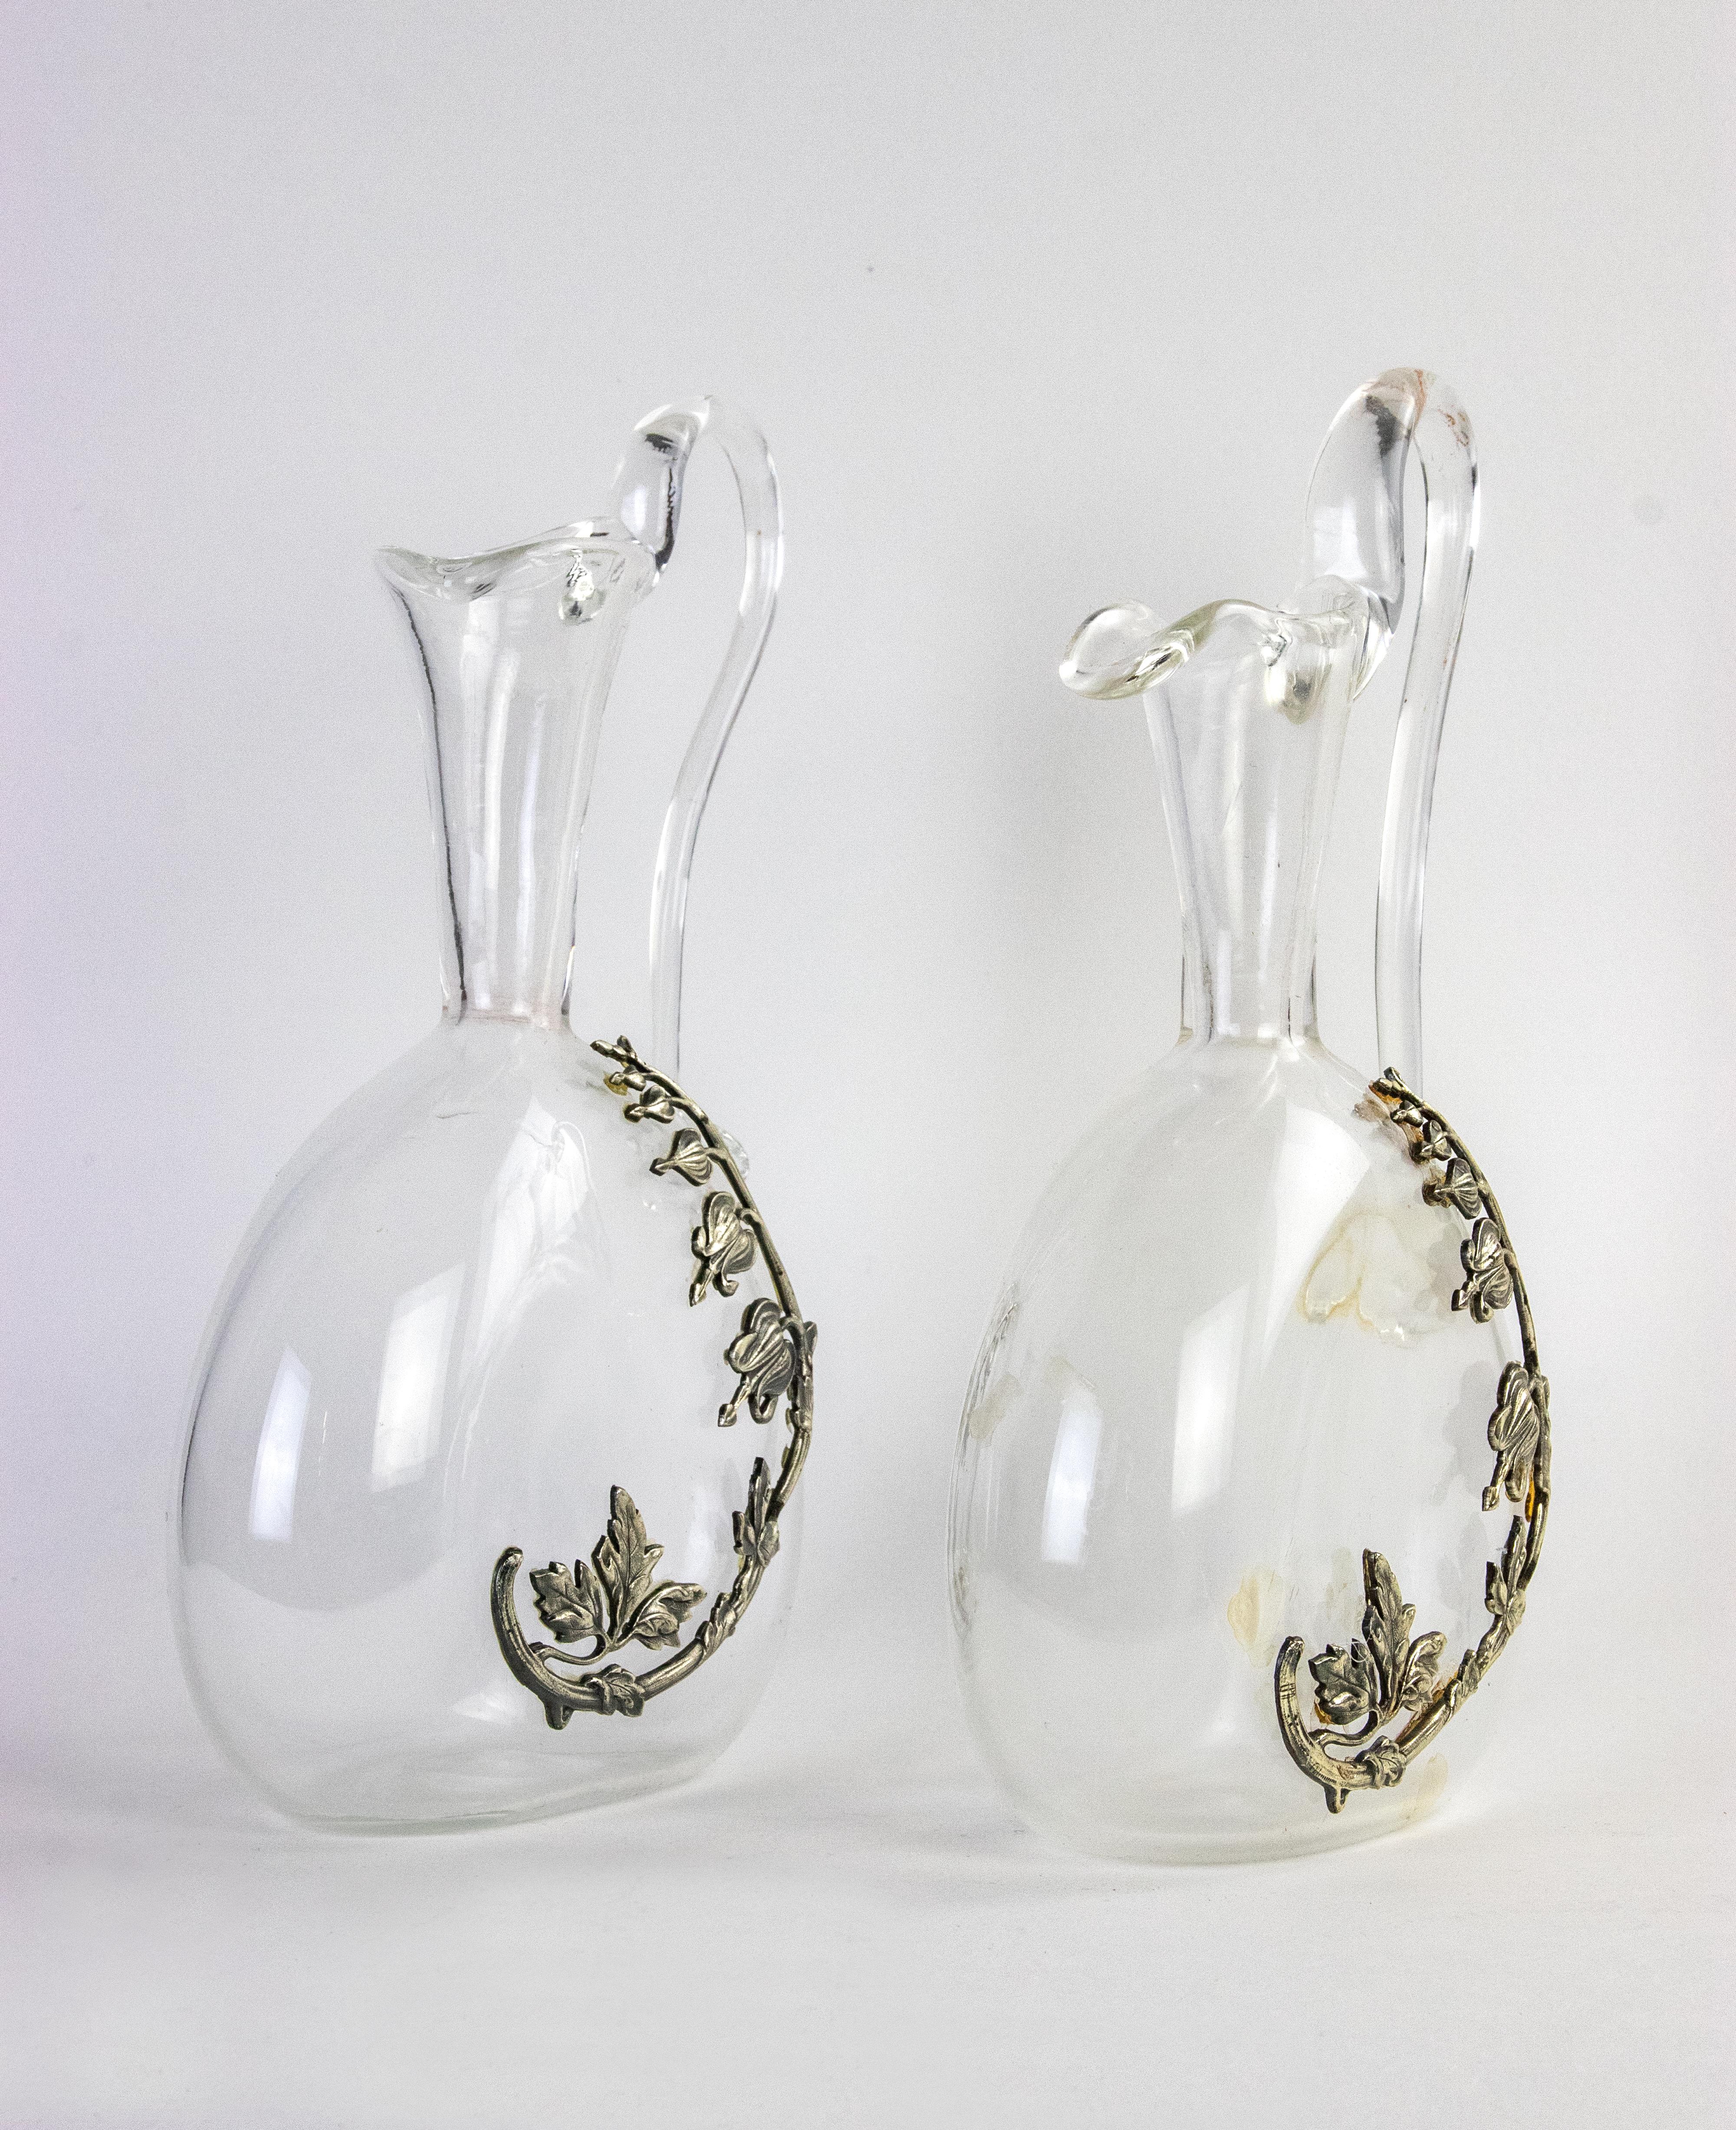  Vintage Pair of Glass Jugs with Silver Decorations, Italy 1970s In Good Condition For Sale In Roma, IT